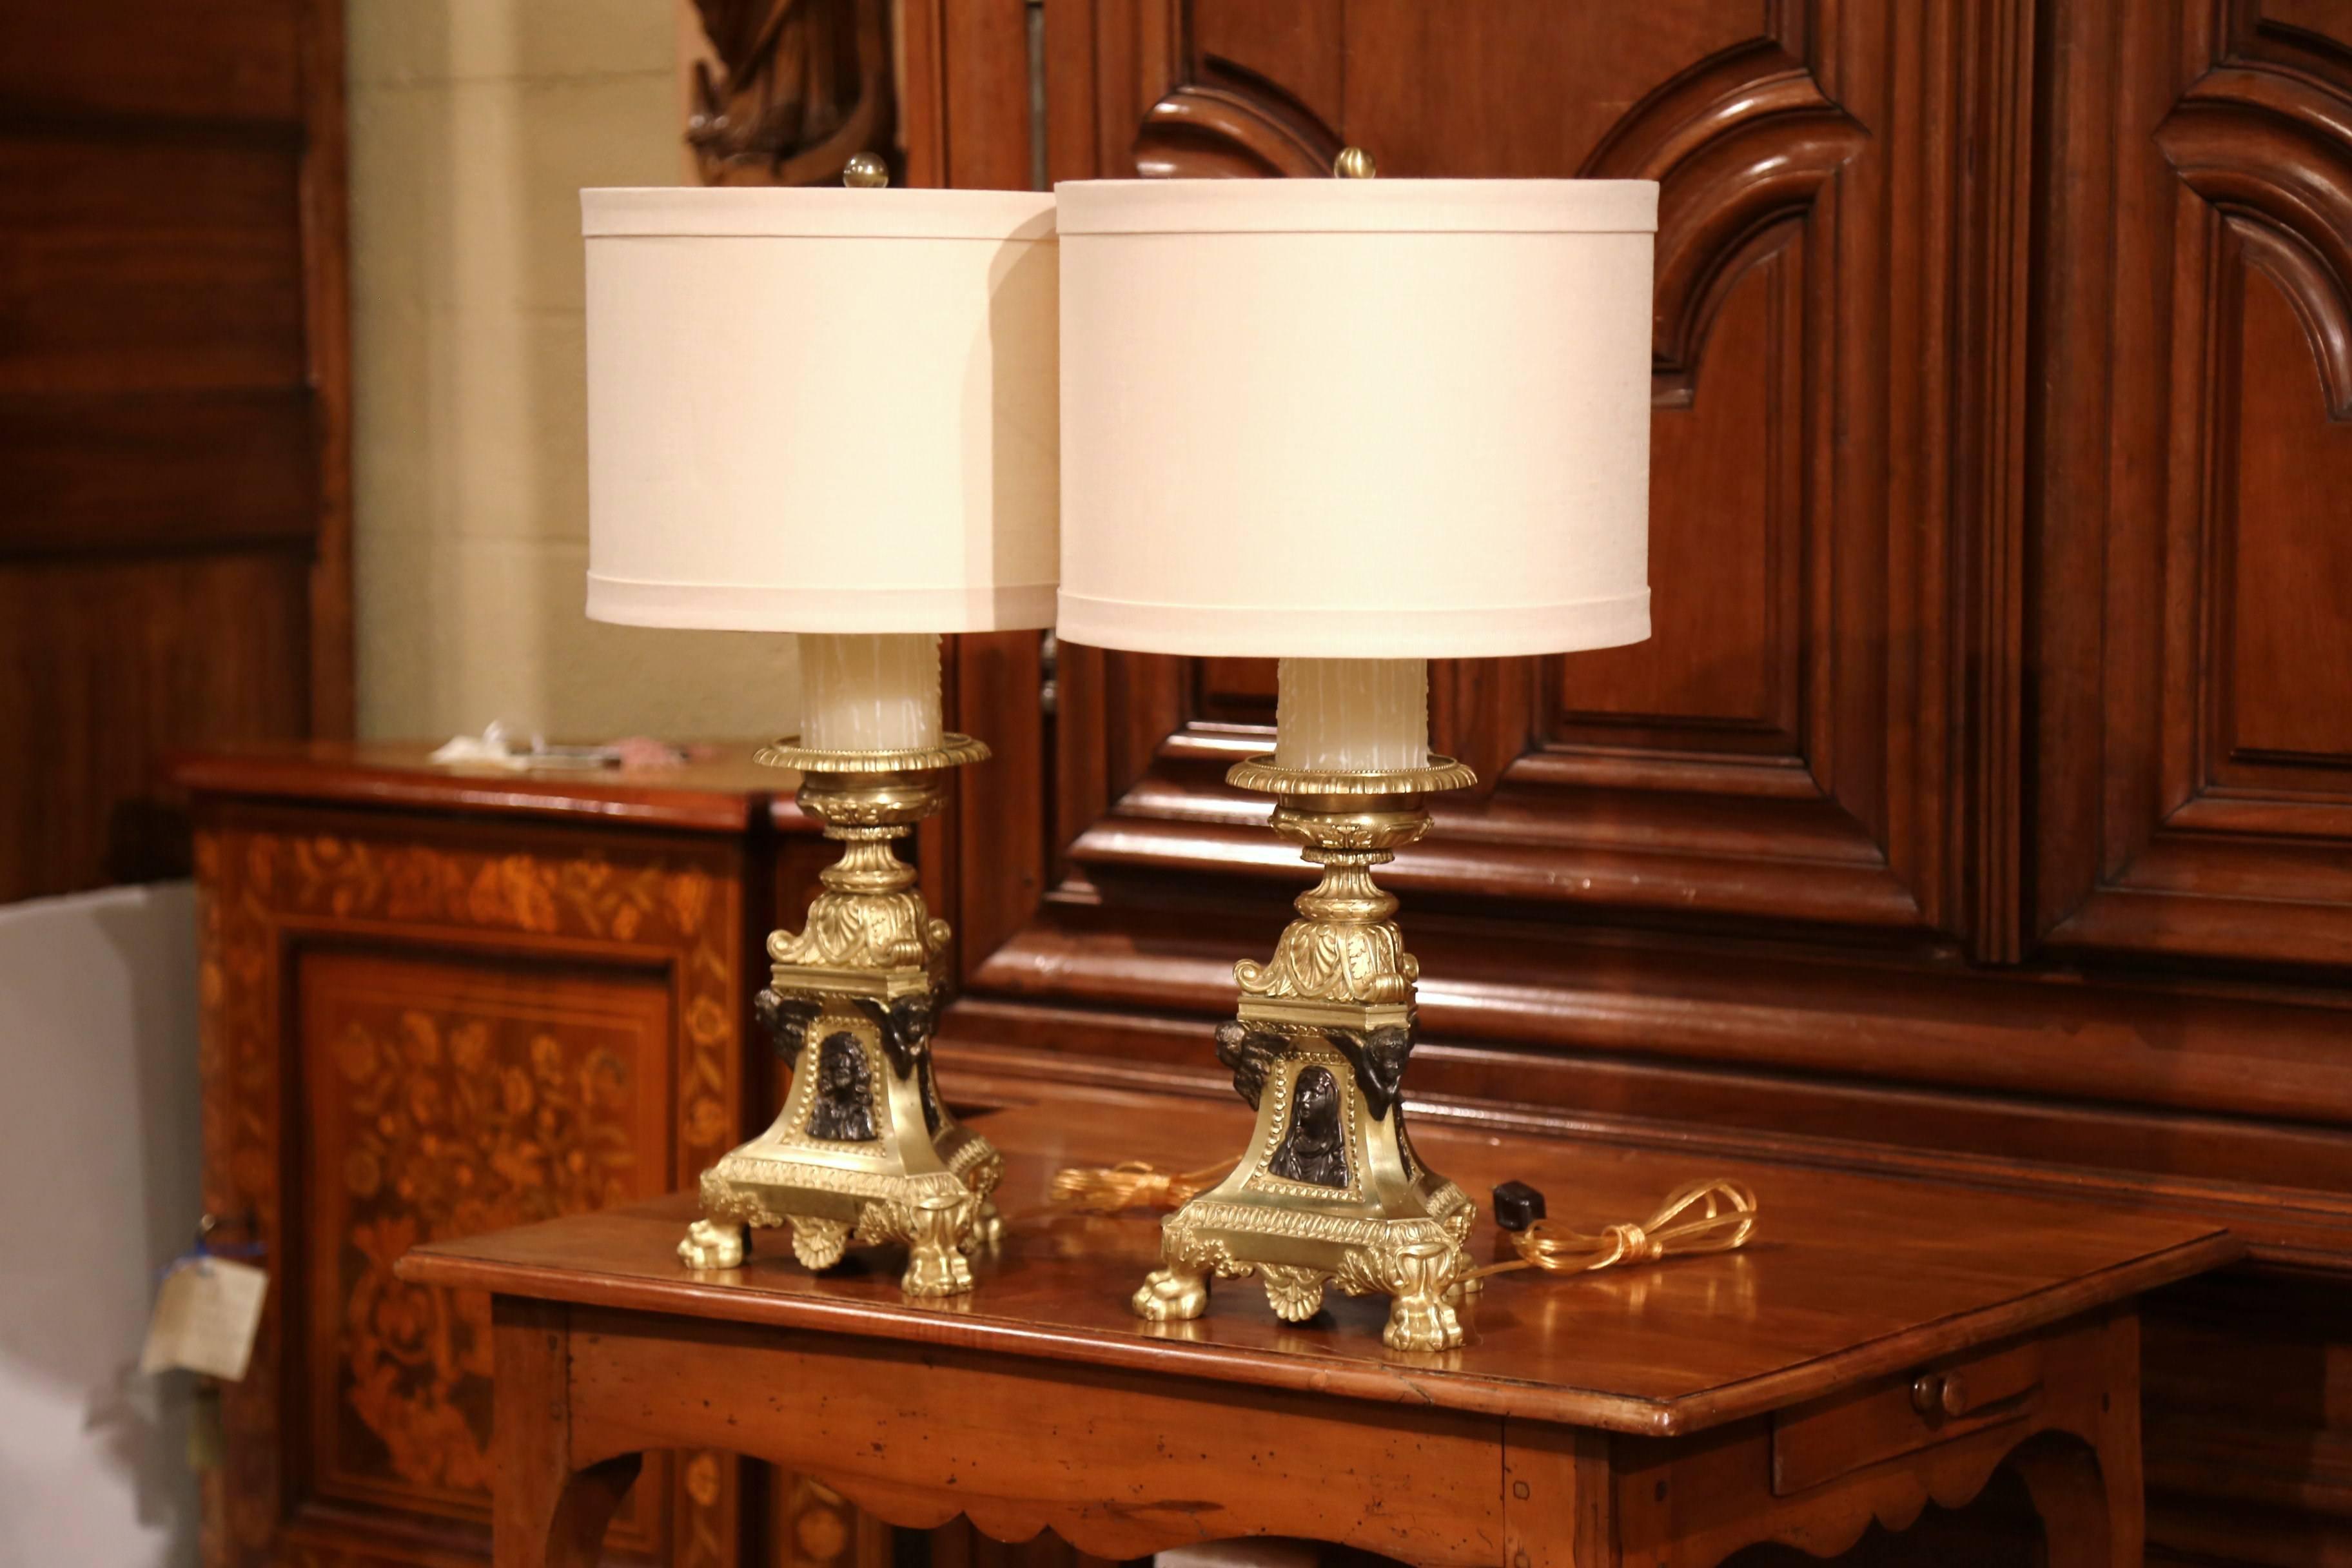 Decorate a living or dining room with these antique church prickets table lamps. Crafted in France, circa 1870, the ornate bronze candlesticks sit on a triangle base ending with three paw feet at the base. Each religious candle holder features a